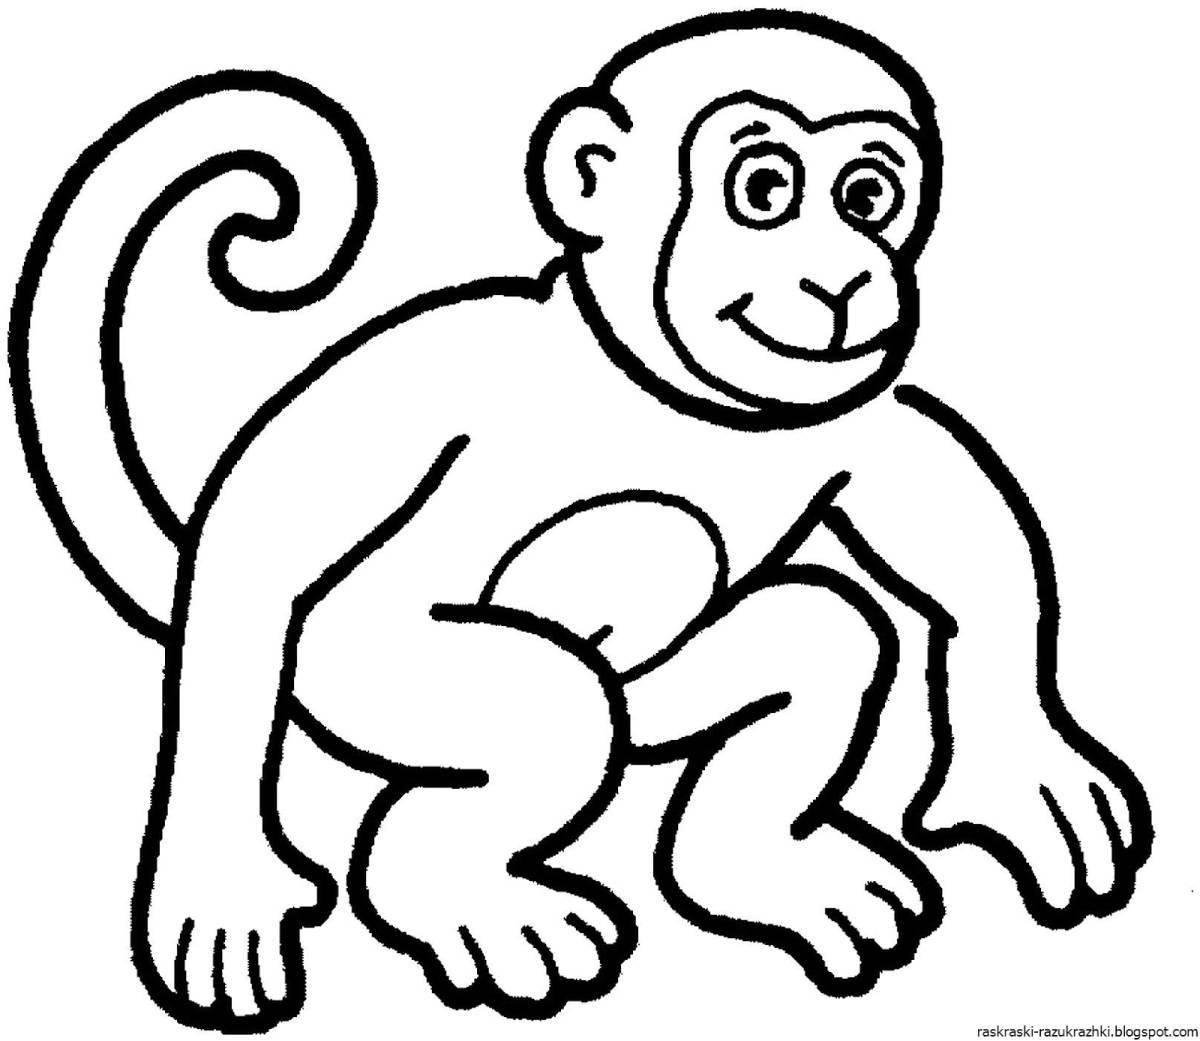 A fun monkey coloring book for kids